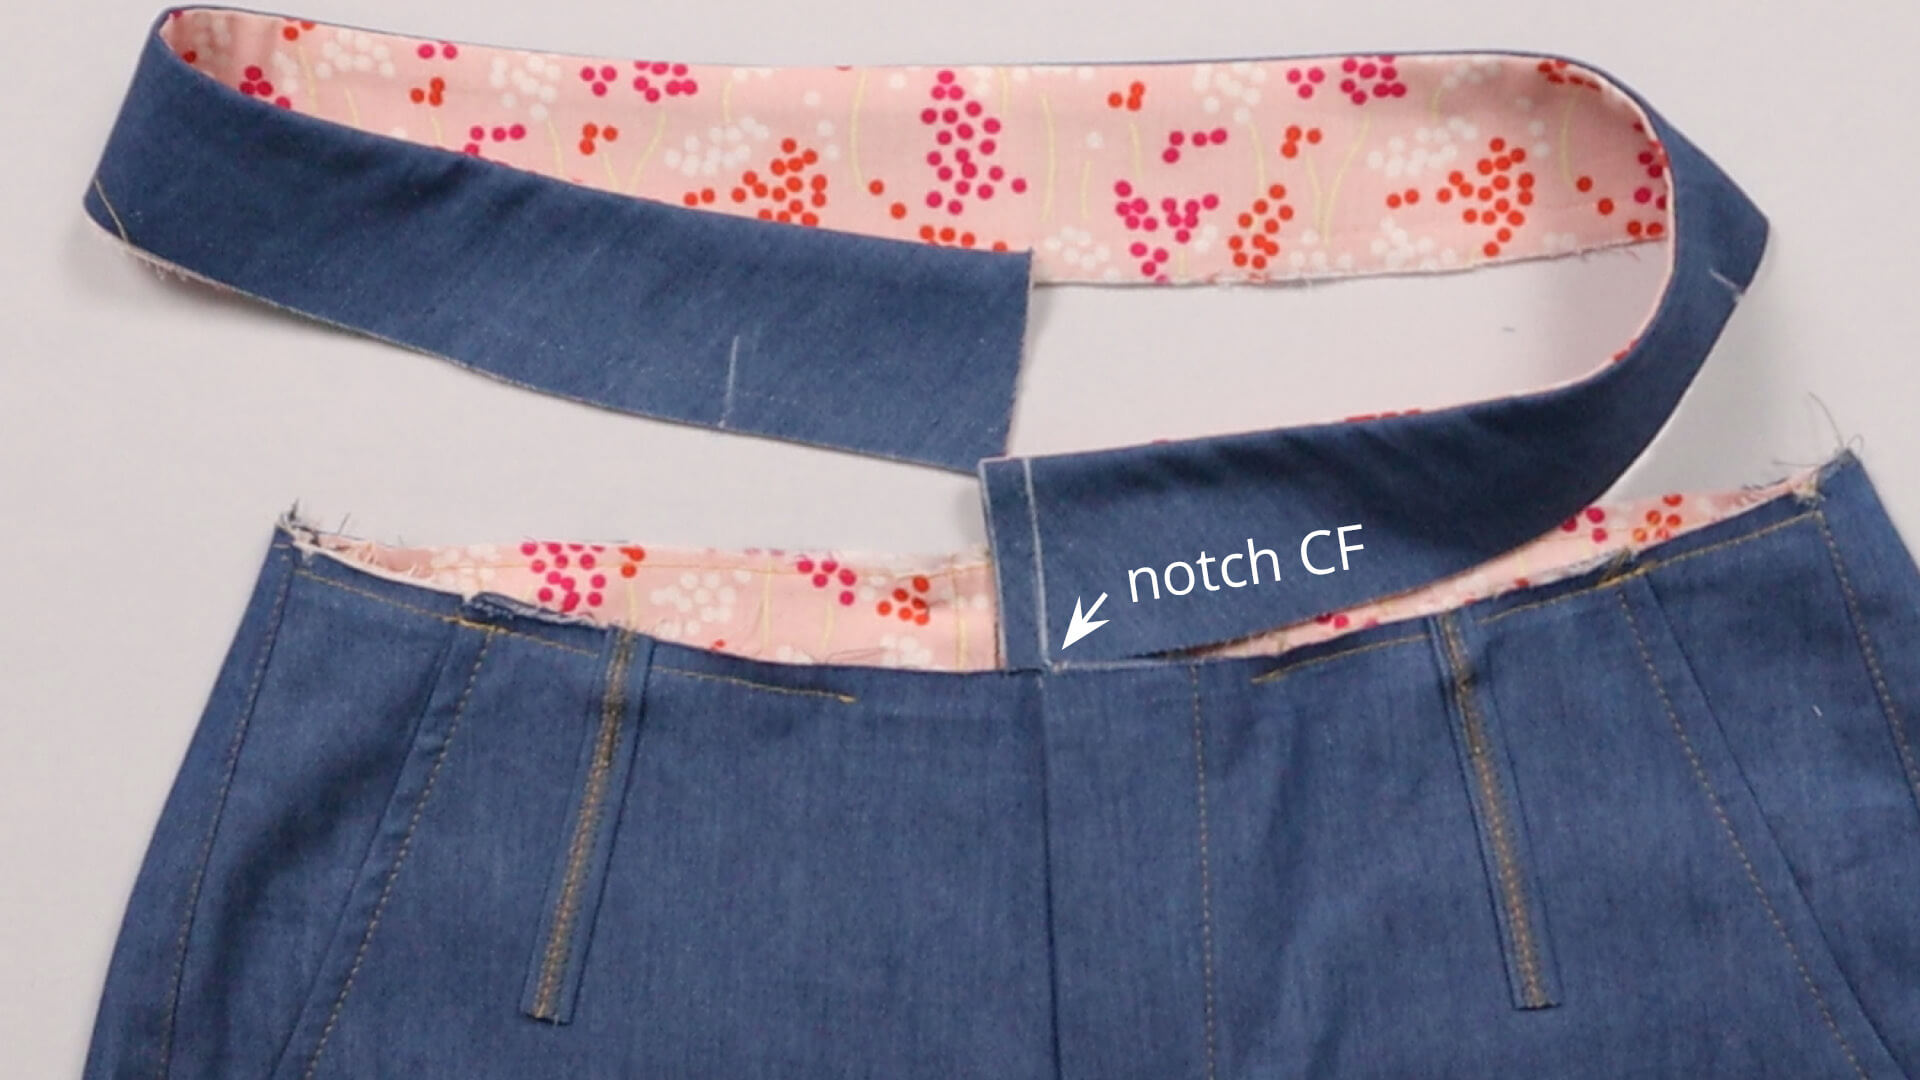 The picture shows how the shortened waistband strip is placed at the center front.